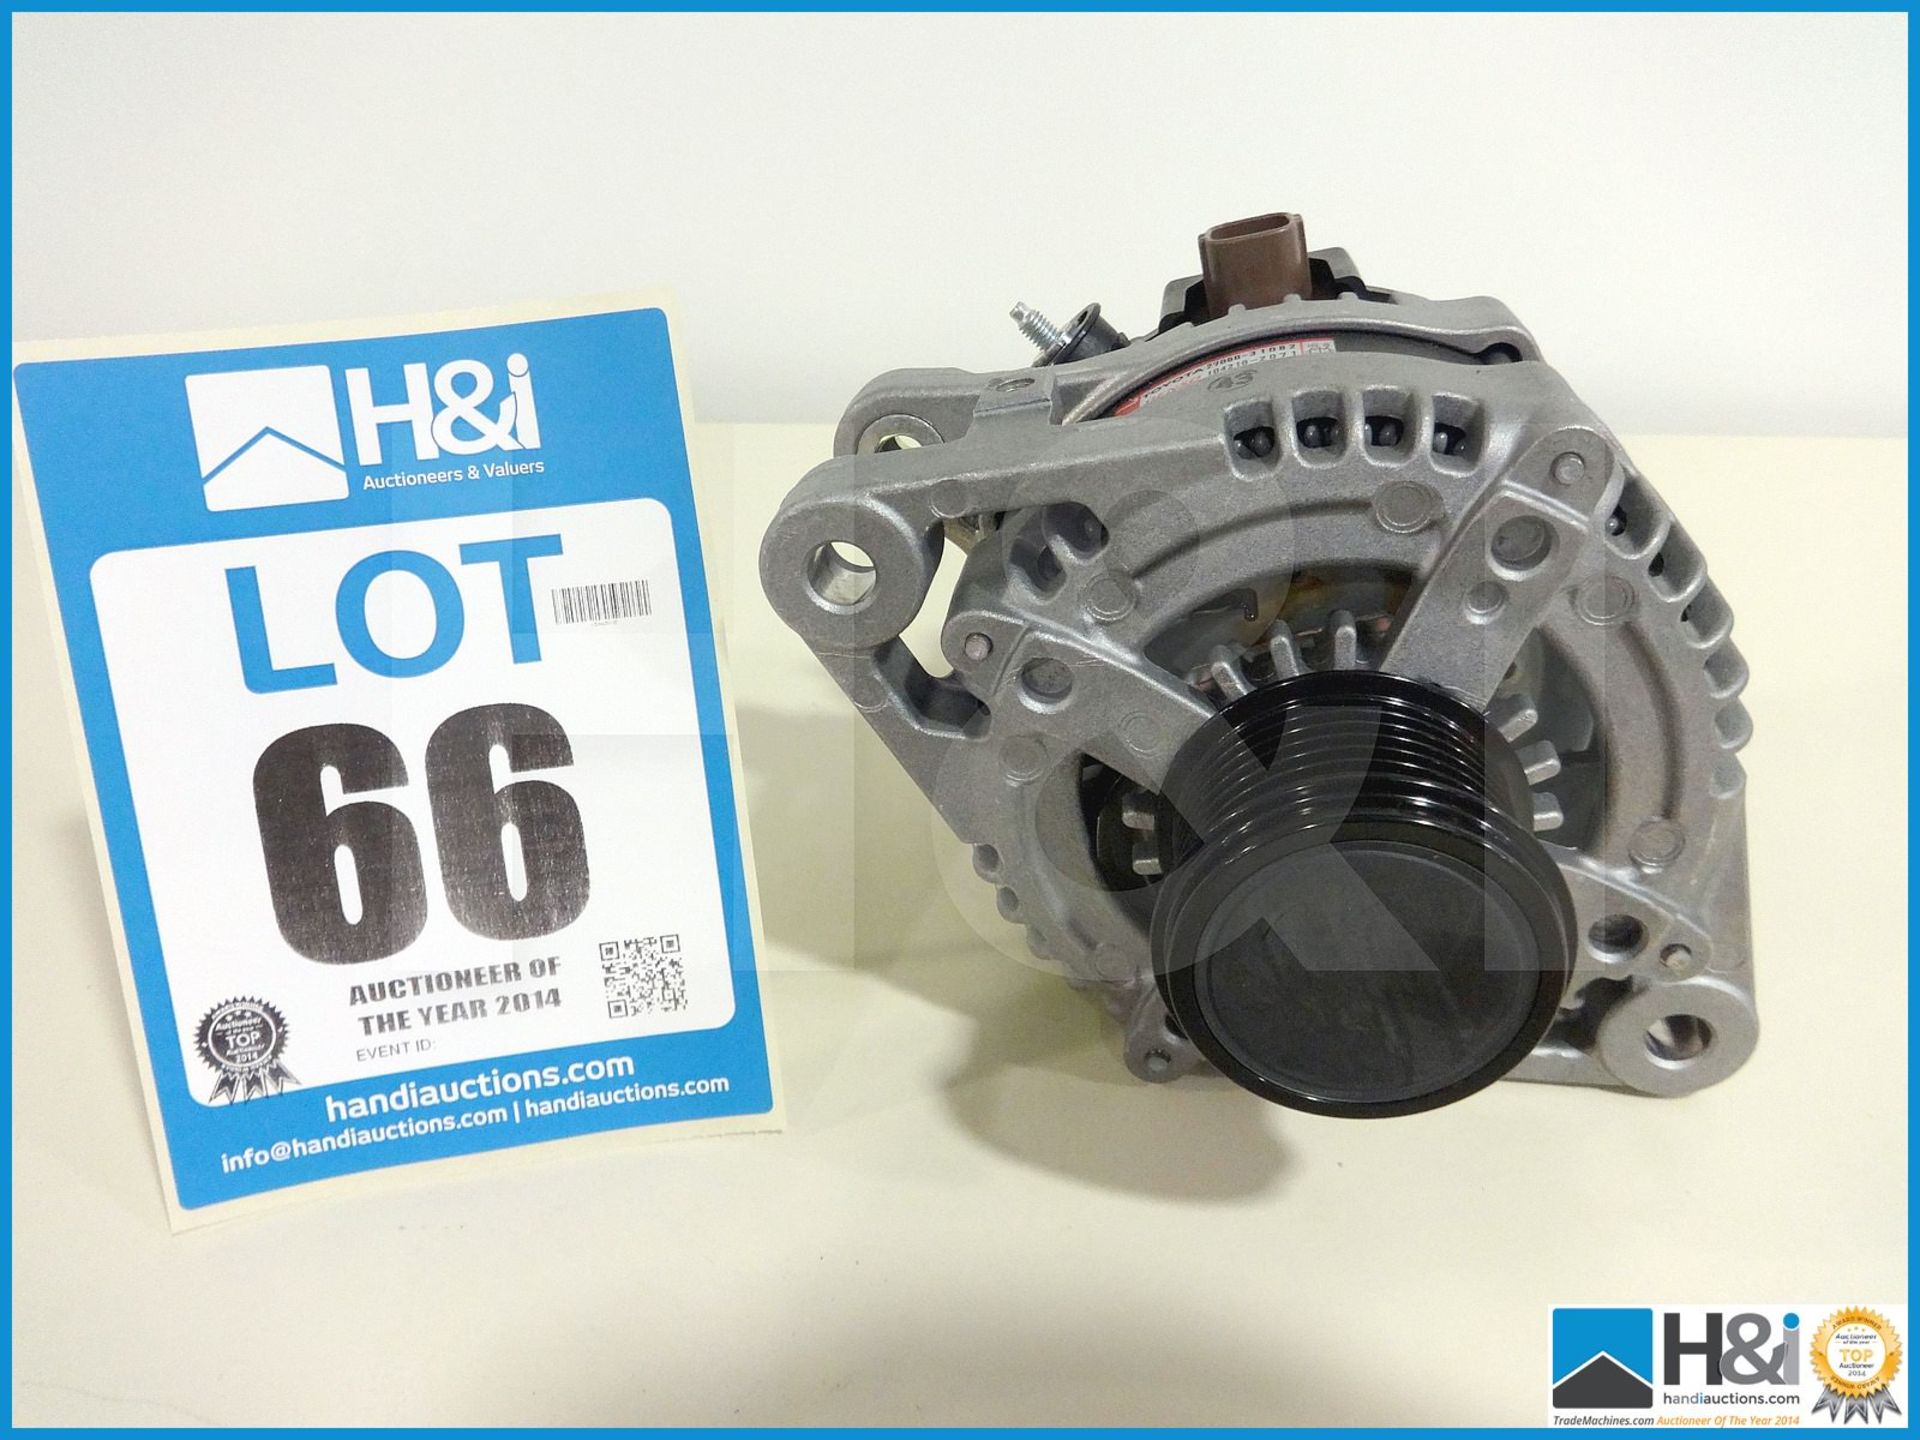 Alternator to suit V6 Lotus Evora engine. Brand new and unused. MC: N/A CILN: N/A